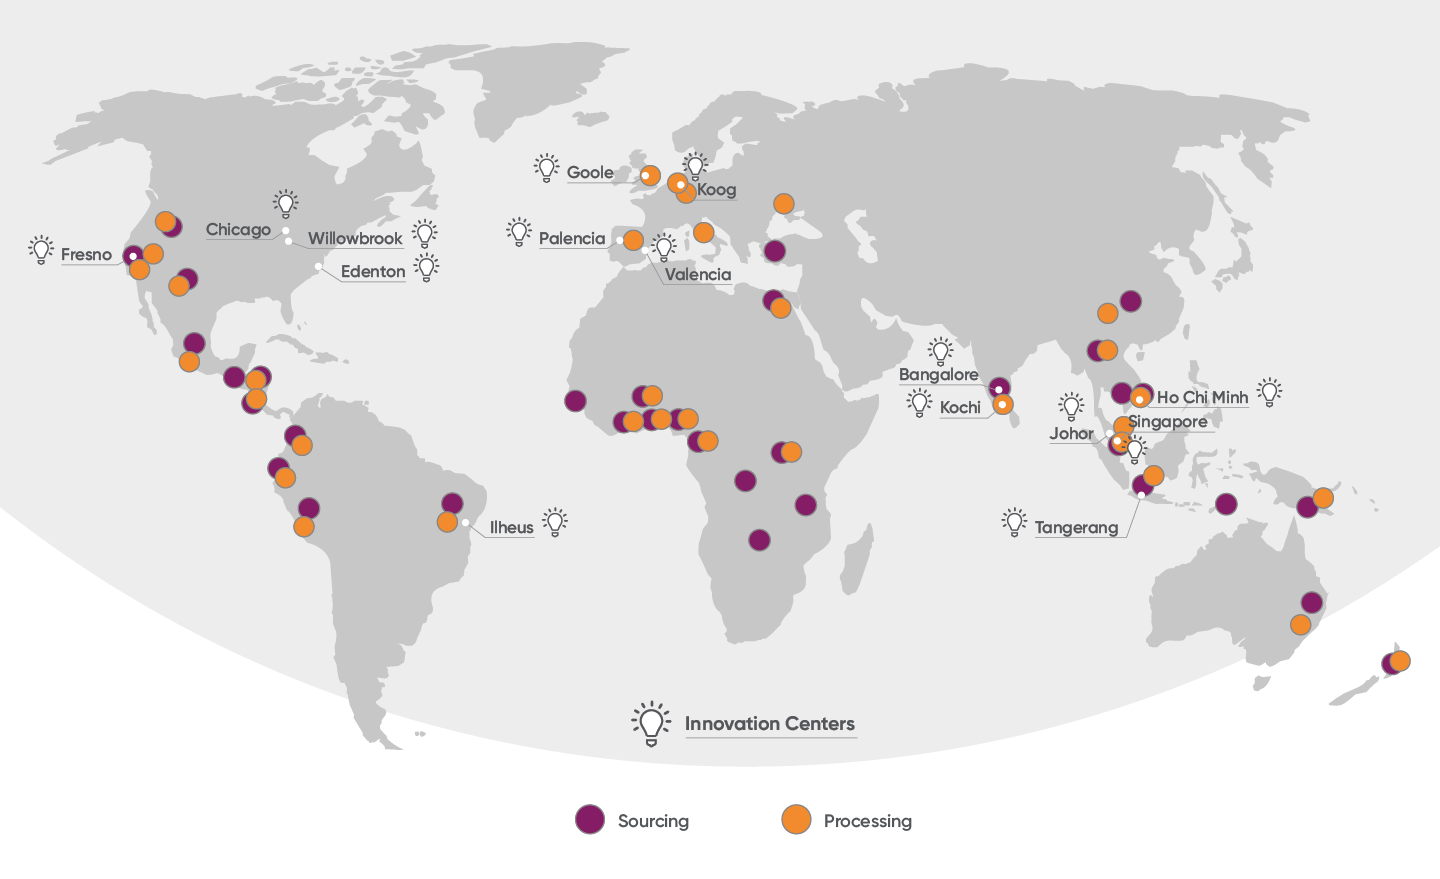 World map of the various ofi innovation centers